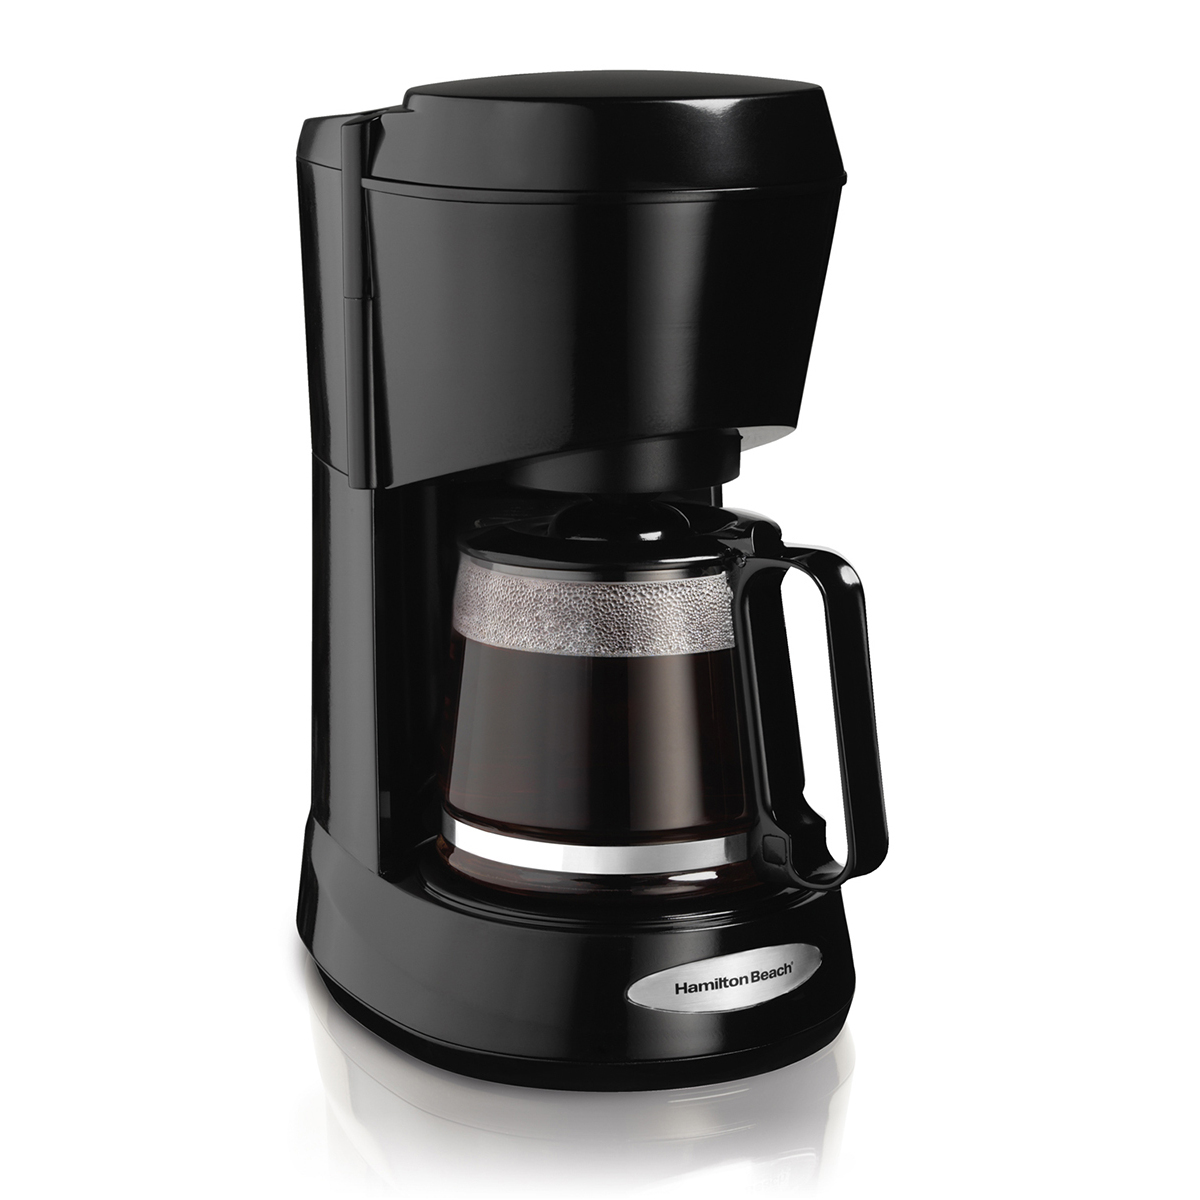 https://www.momjunction.com/wp-content/uploads/product-images/hamilton-beach-5-cup-switch-coffee-maker_afl140.jpg